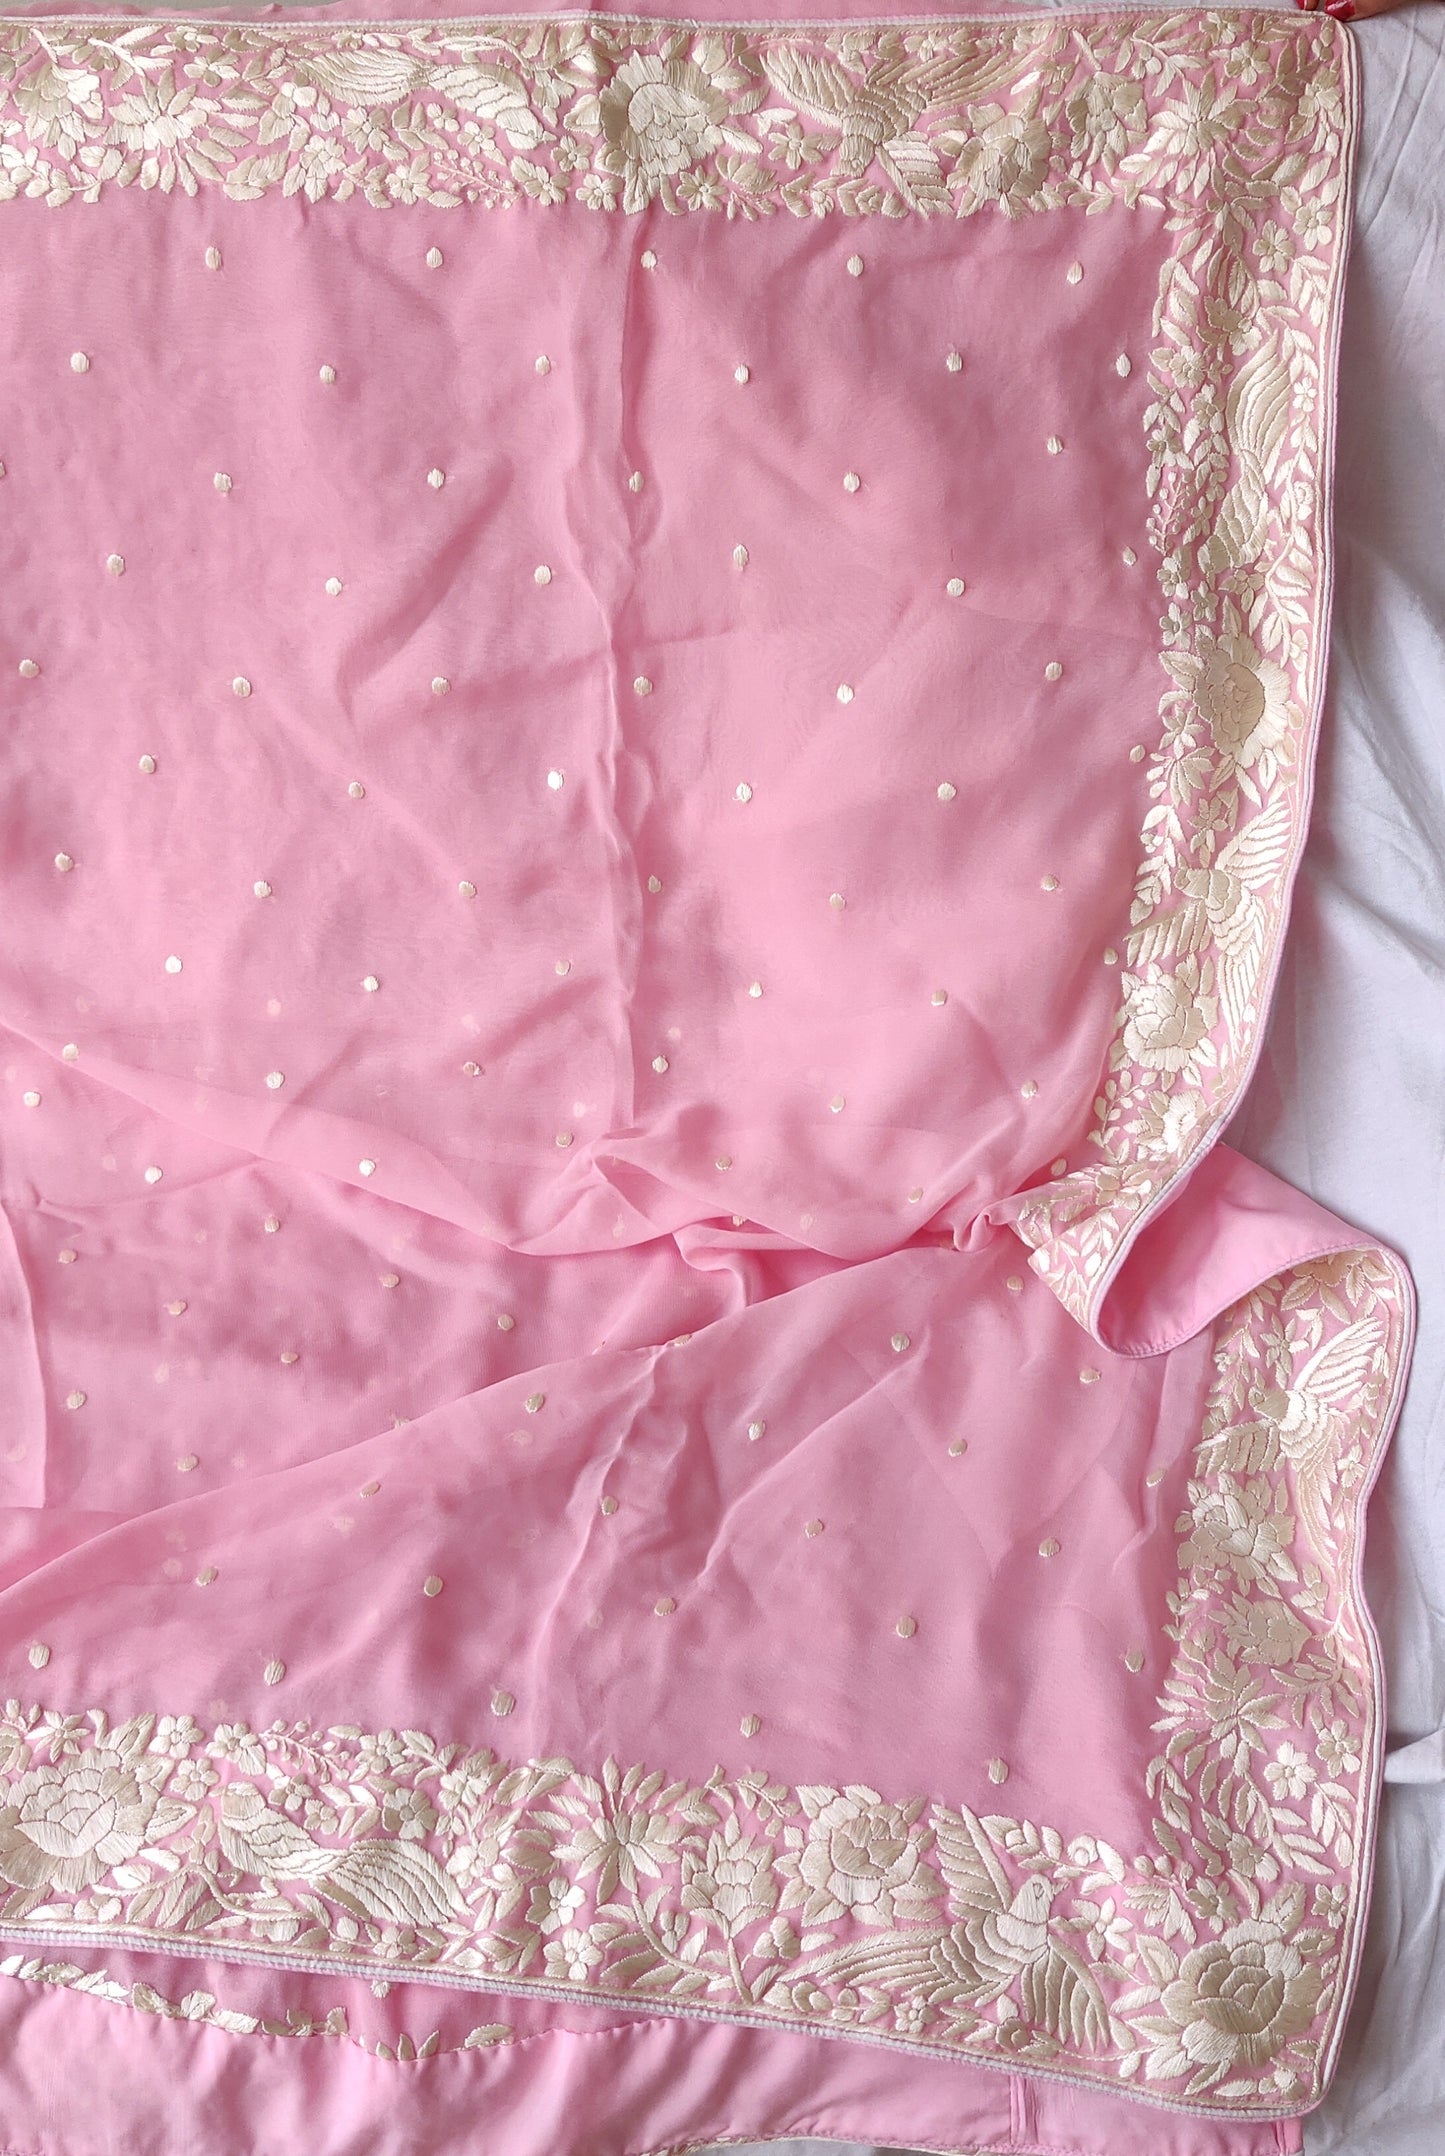 Pretty Pink pure georgette saree with parsi gara hand embroidery